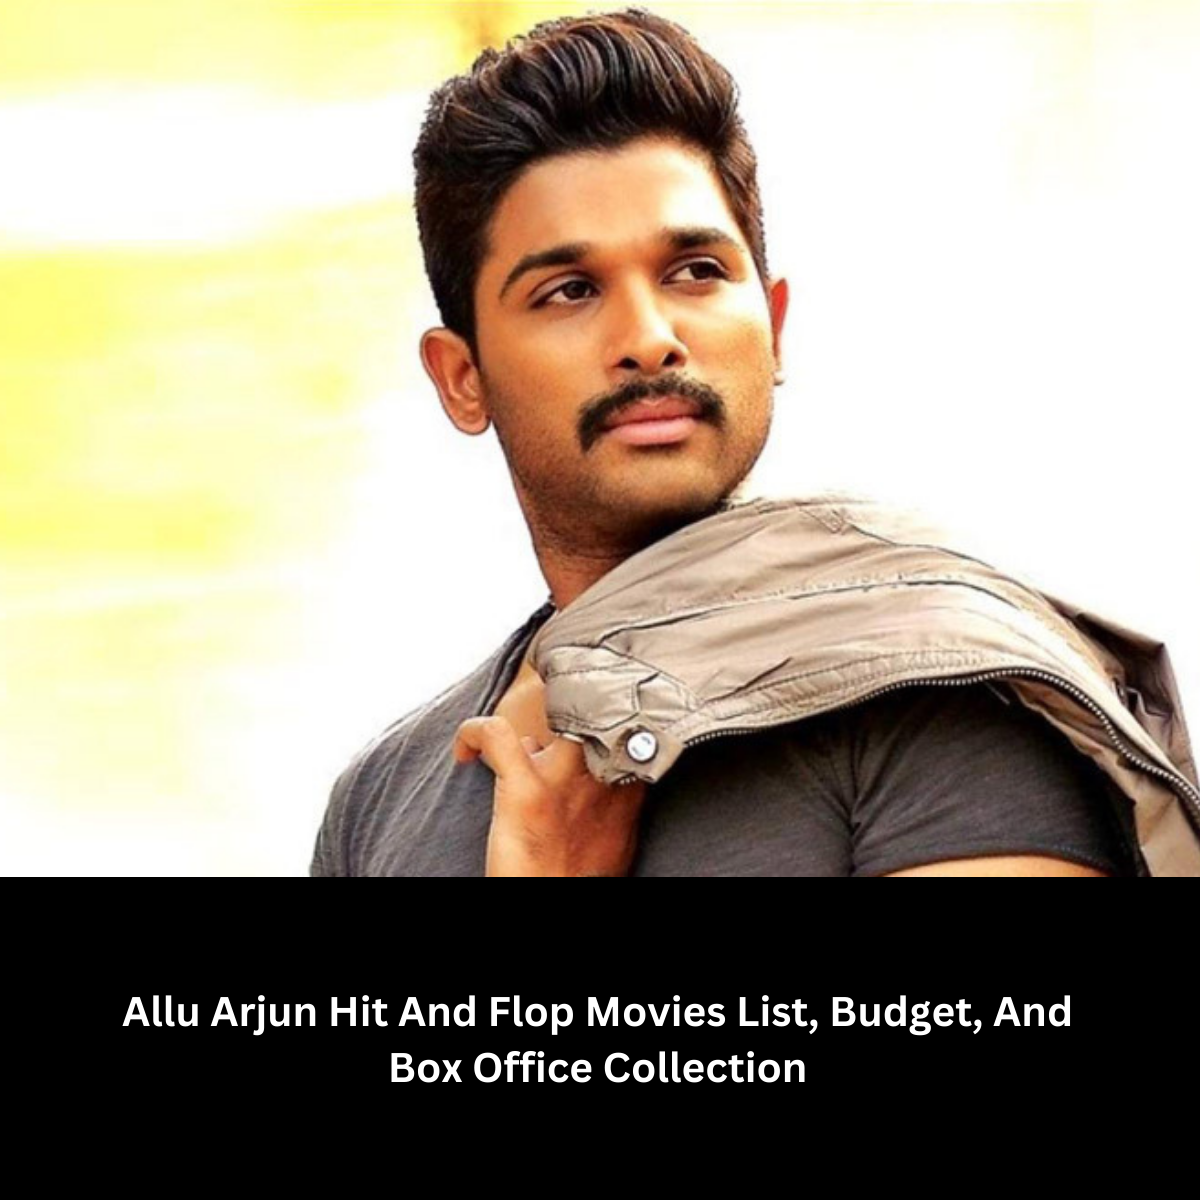 Allu Arjun Hit And Flop Movies List, Budget, And Box Office Collection